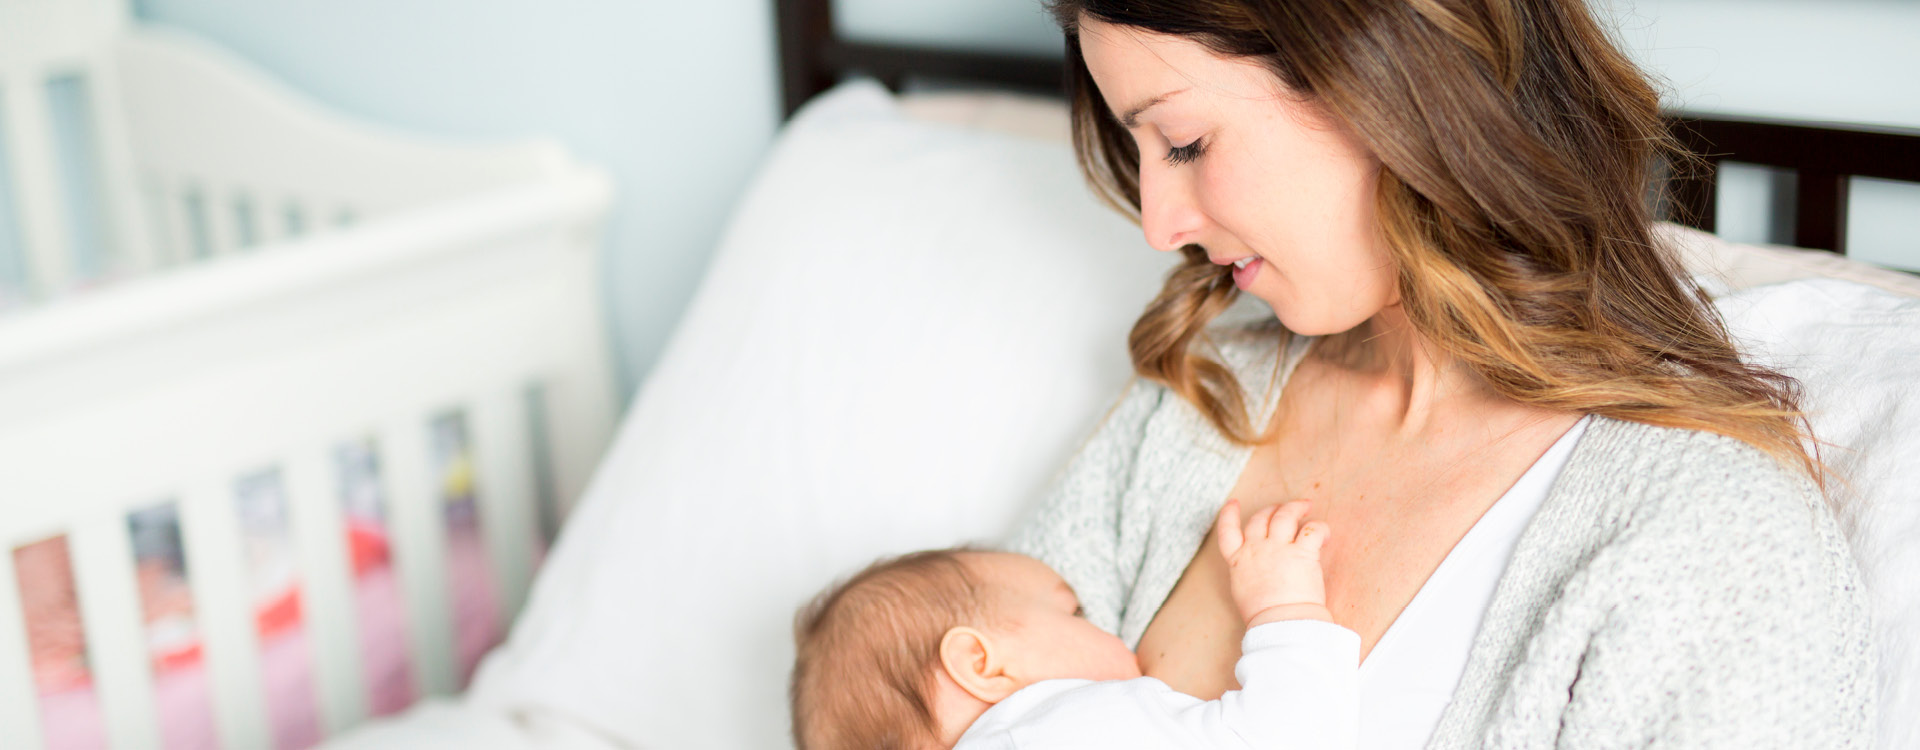 How to Prepare for Breastfeeding While Pregnant Article Image